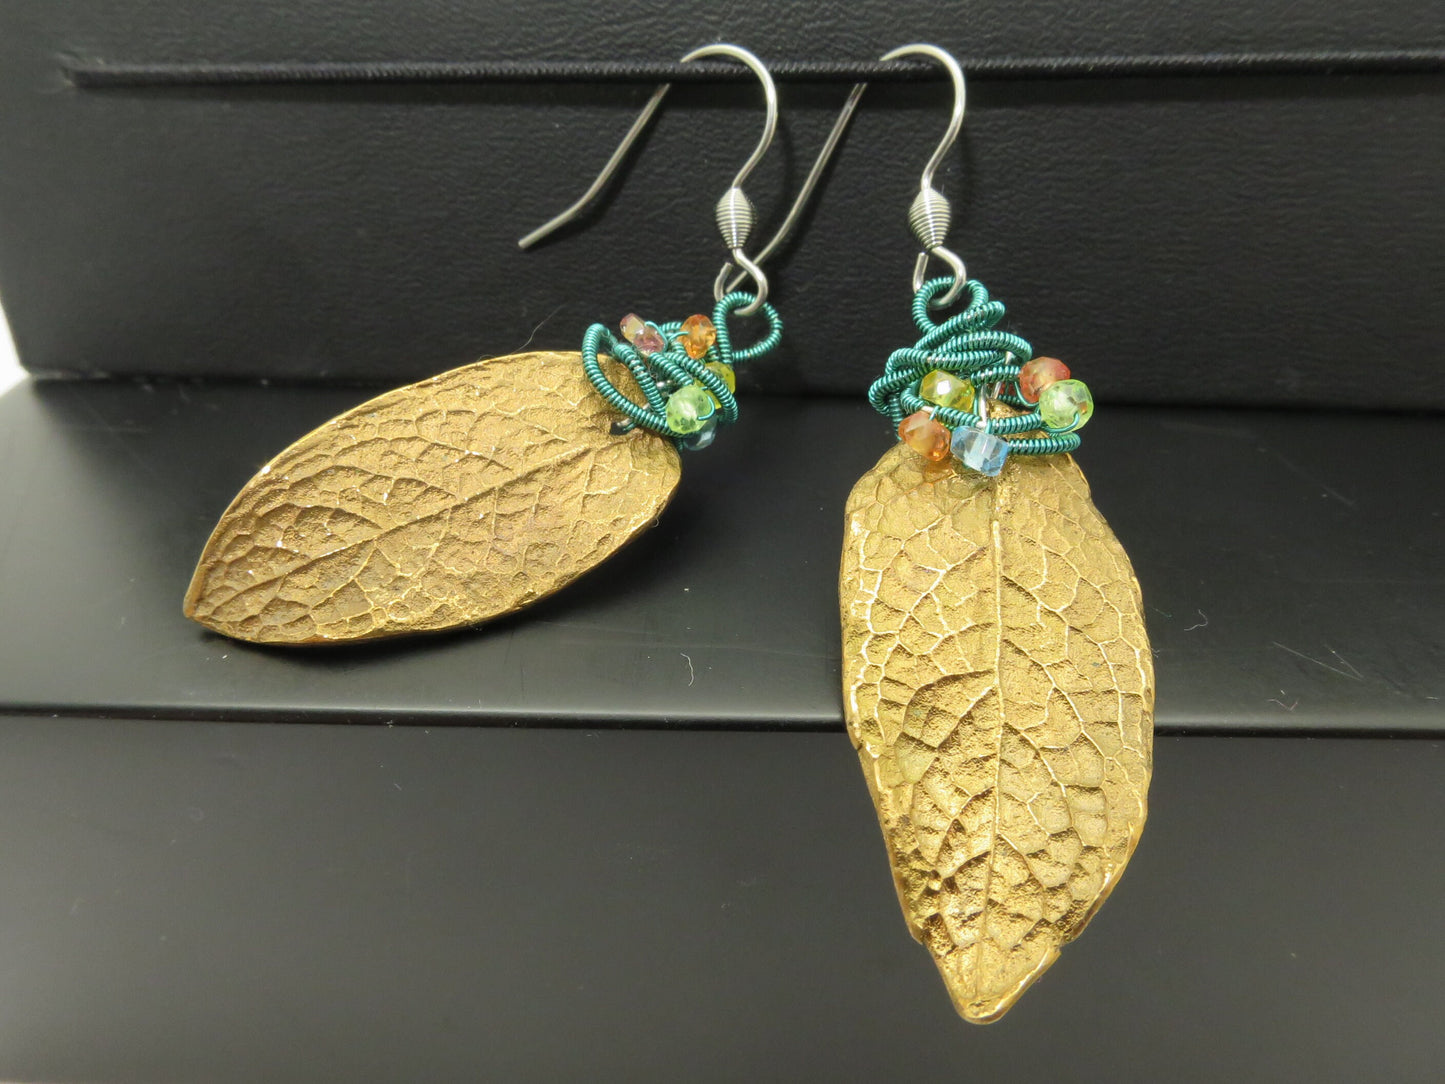 Magical bronze earrings mint leaf from the garden stainless steel ear hook with colorful gemstones